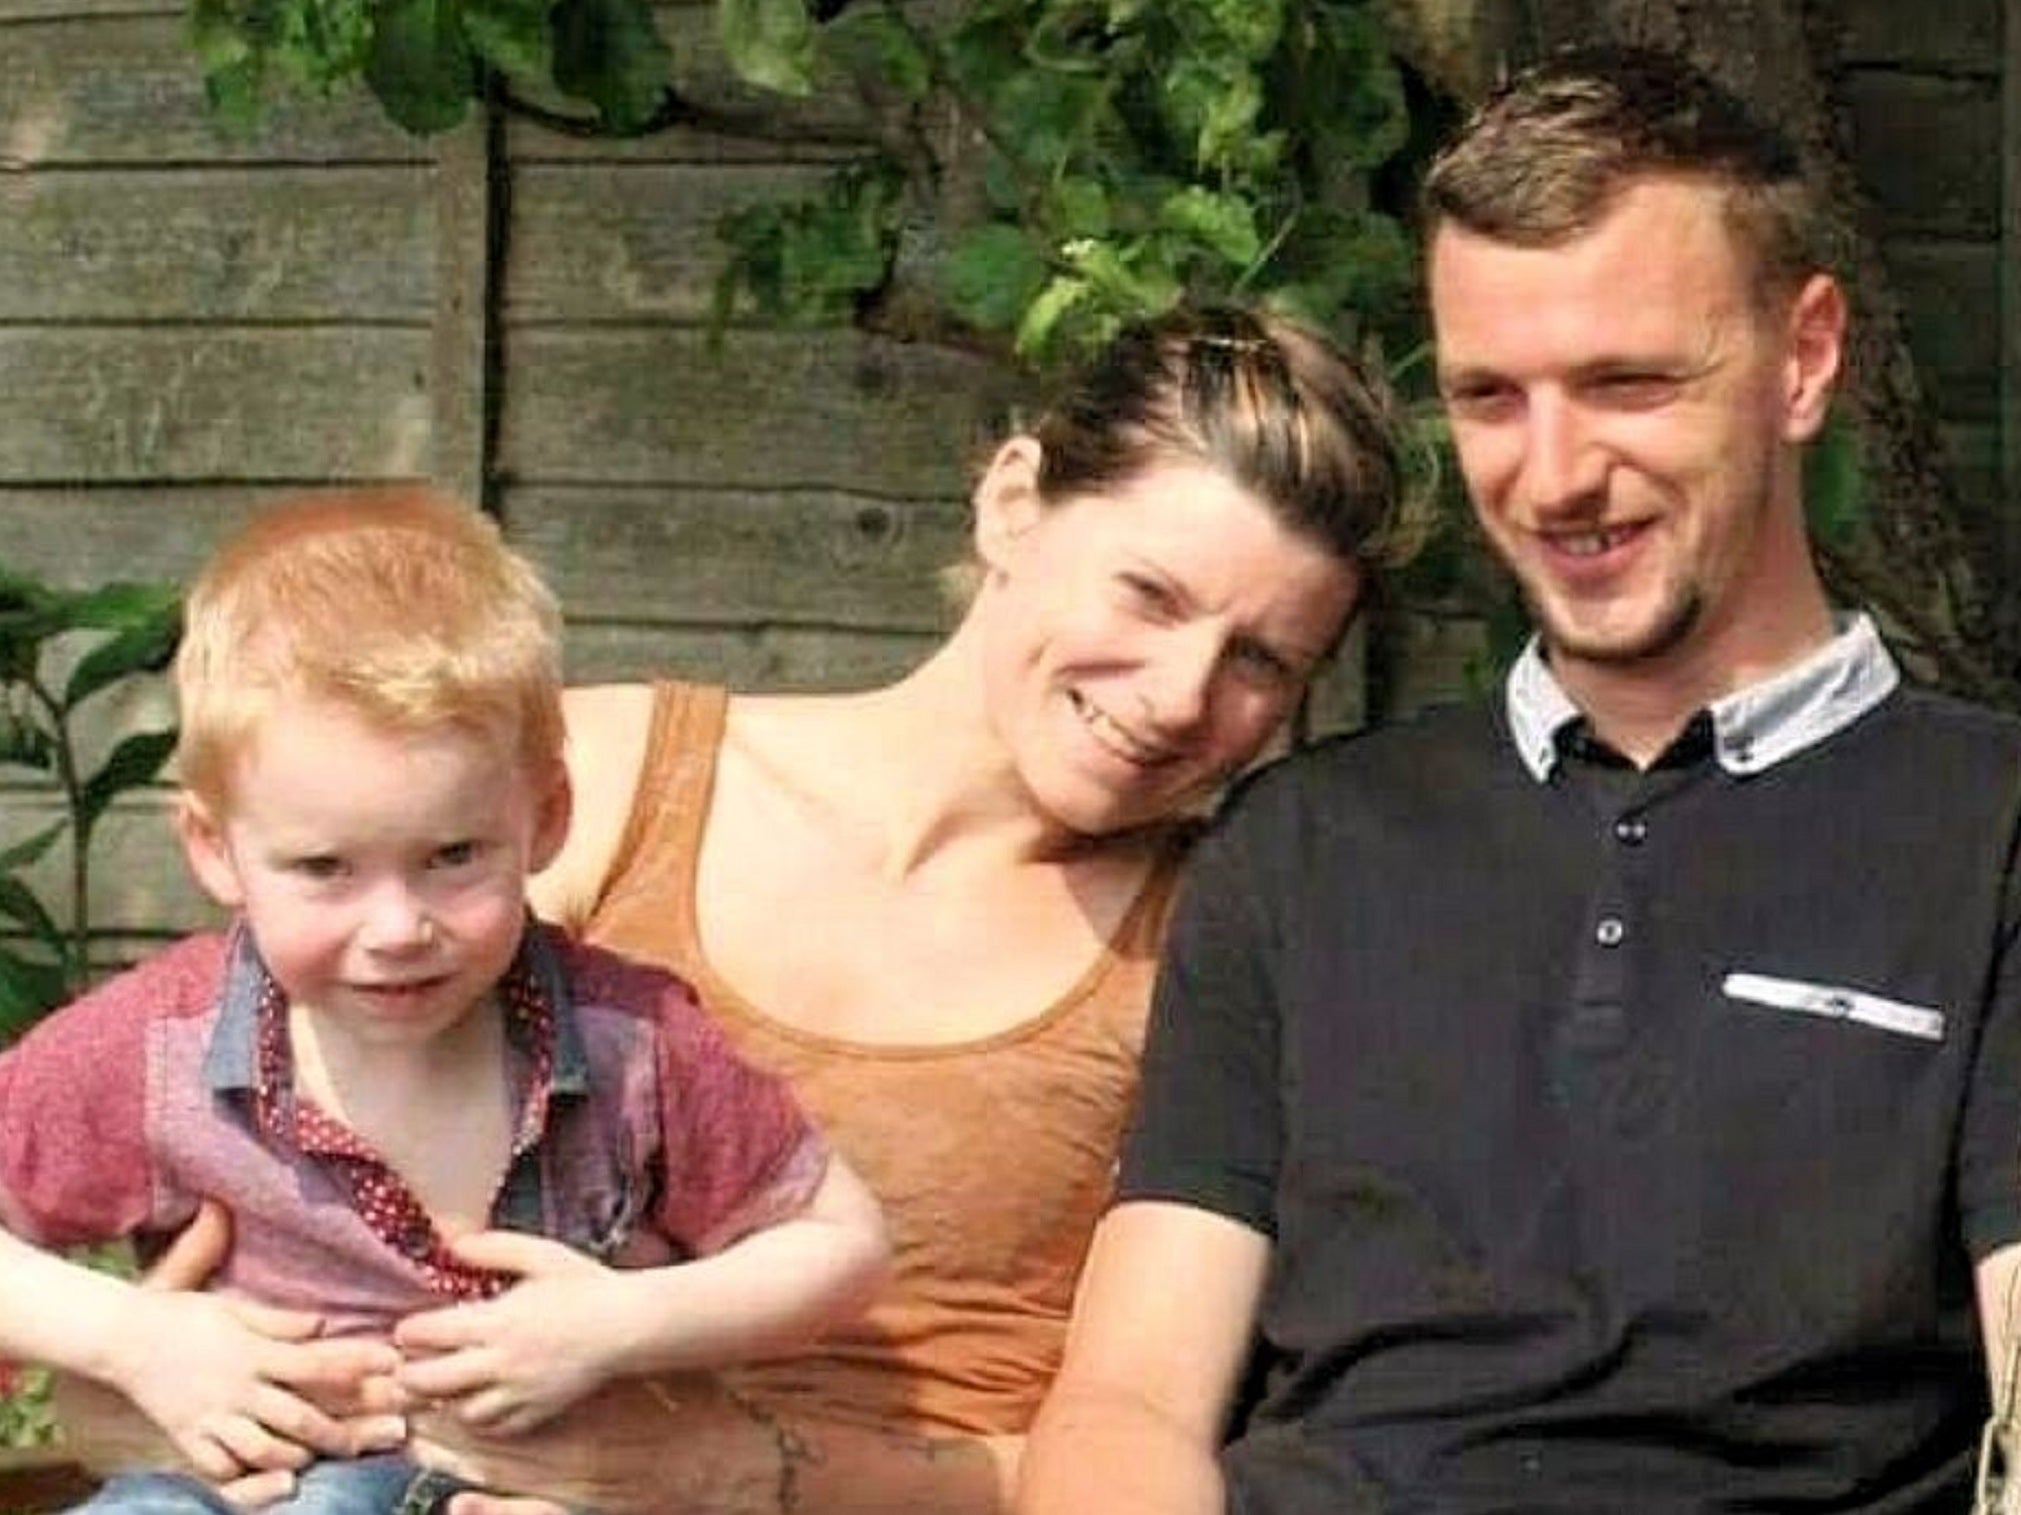 Gina Ingles, 34, and four-year-old son Miles Ingles-Bailey died during an arson attack at a house in Eastbourne on 10 July, 2018, while Ms Ingles' partner Toby Jarrett, 27, (right) survived after escaping through an upstairs window.